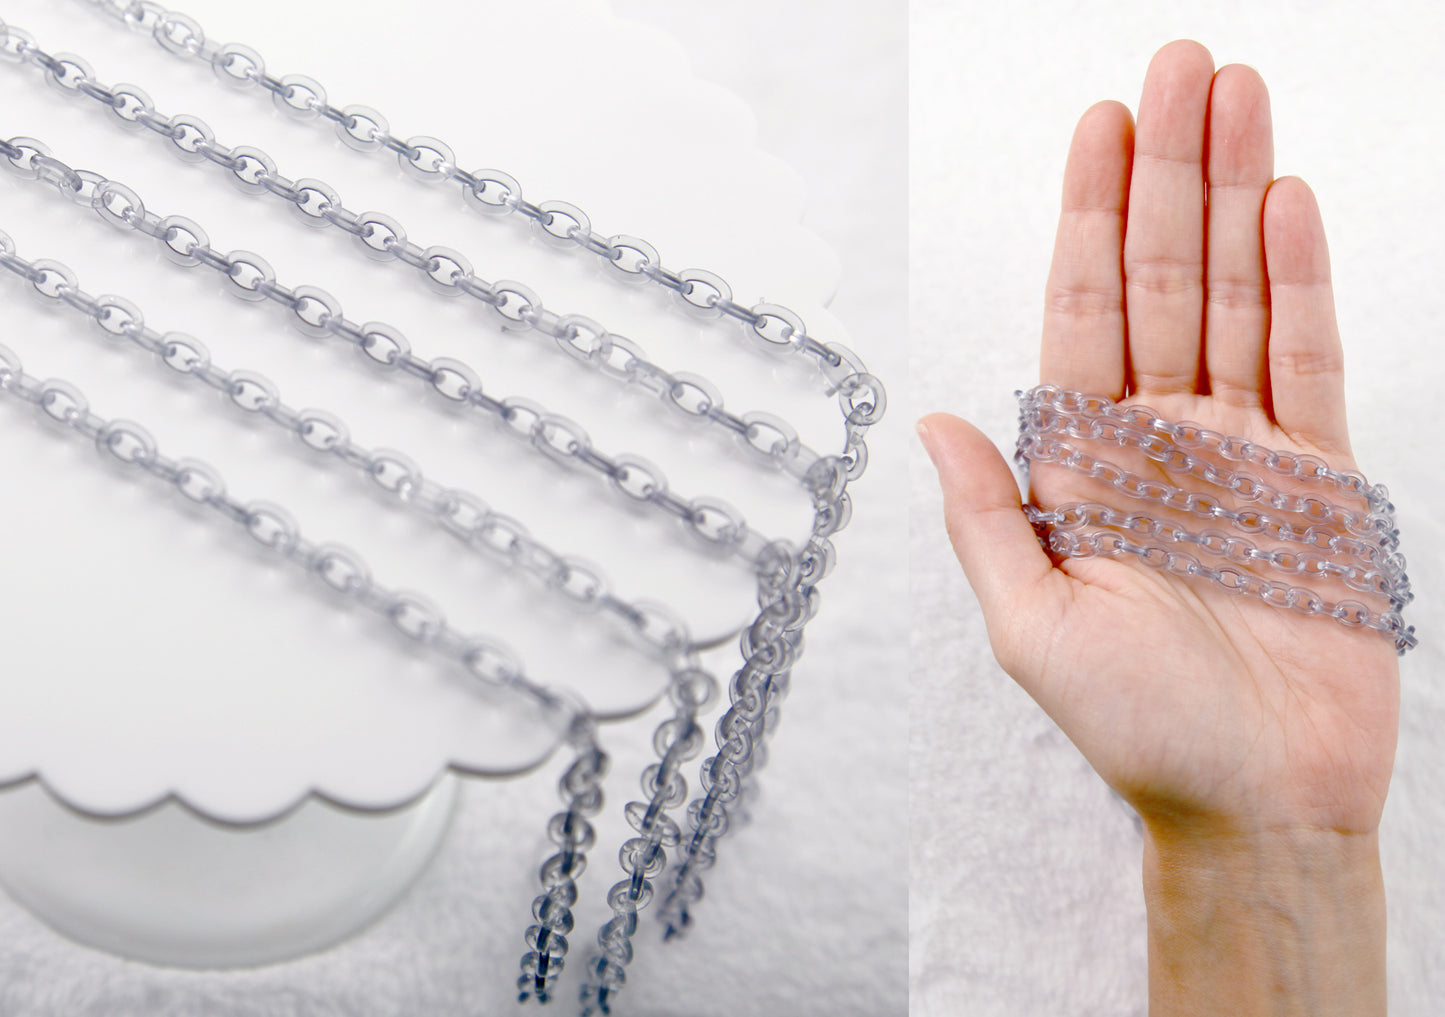 Transparent Black Gray Plastic Chain - 8mm Perfect Acrylic or Plastic Chain - 20 inch / 50 cm length - For Necklaces and Jewelry - 3 pcs set